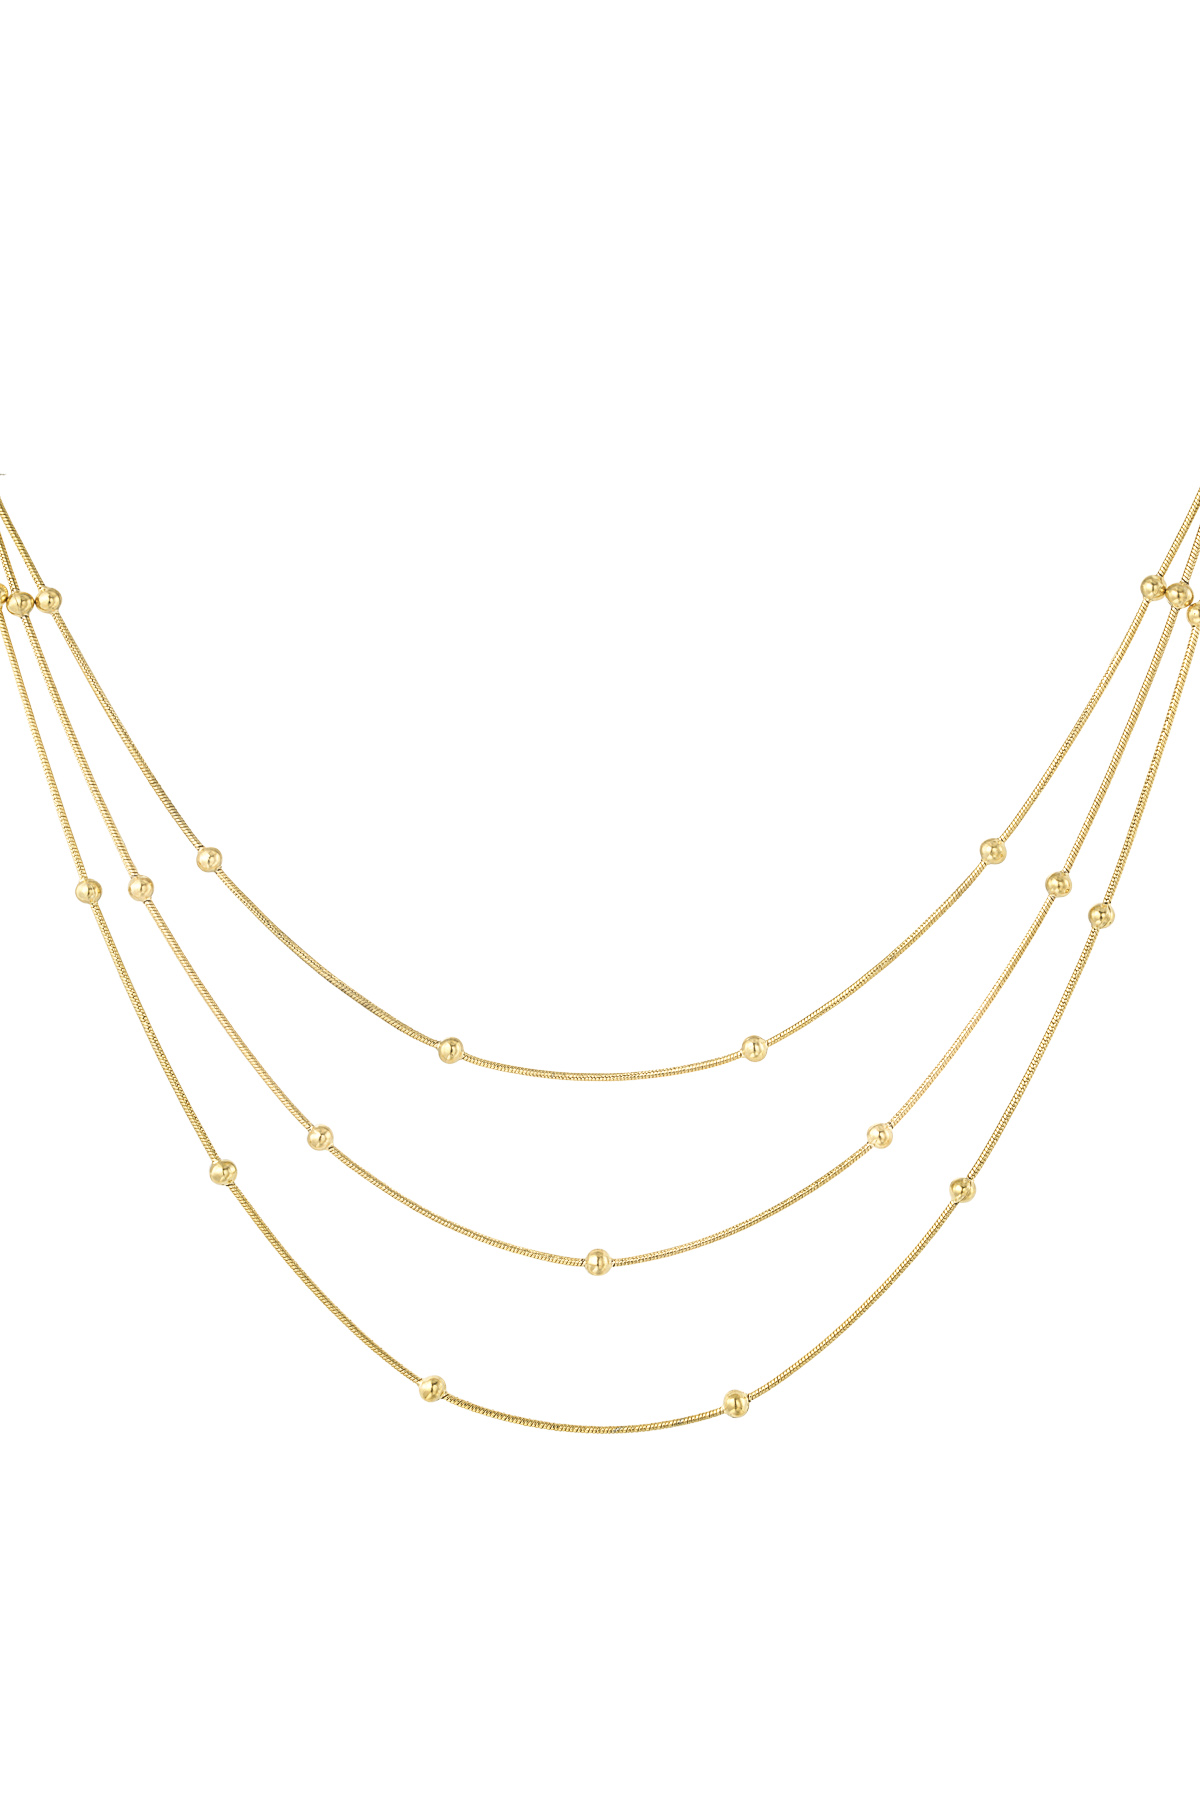 Necklace with a twist - gold h5 